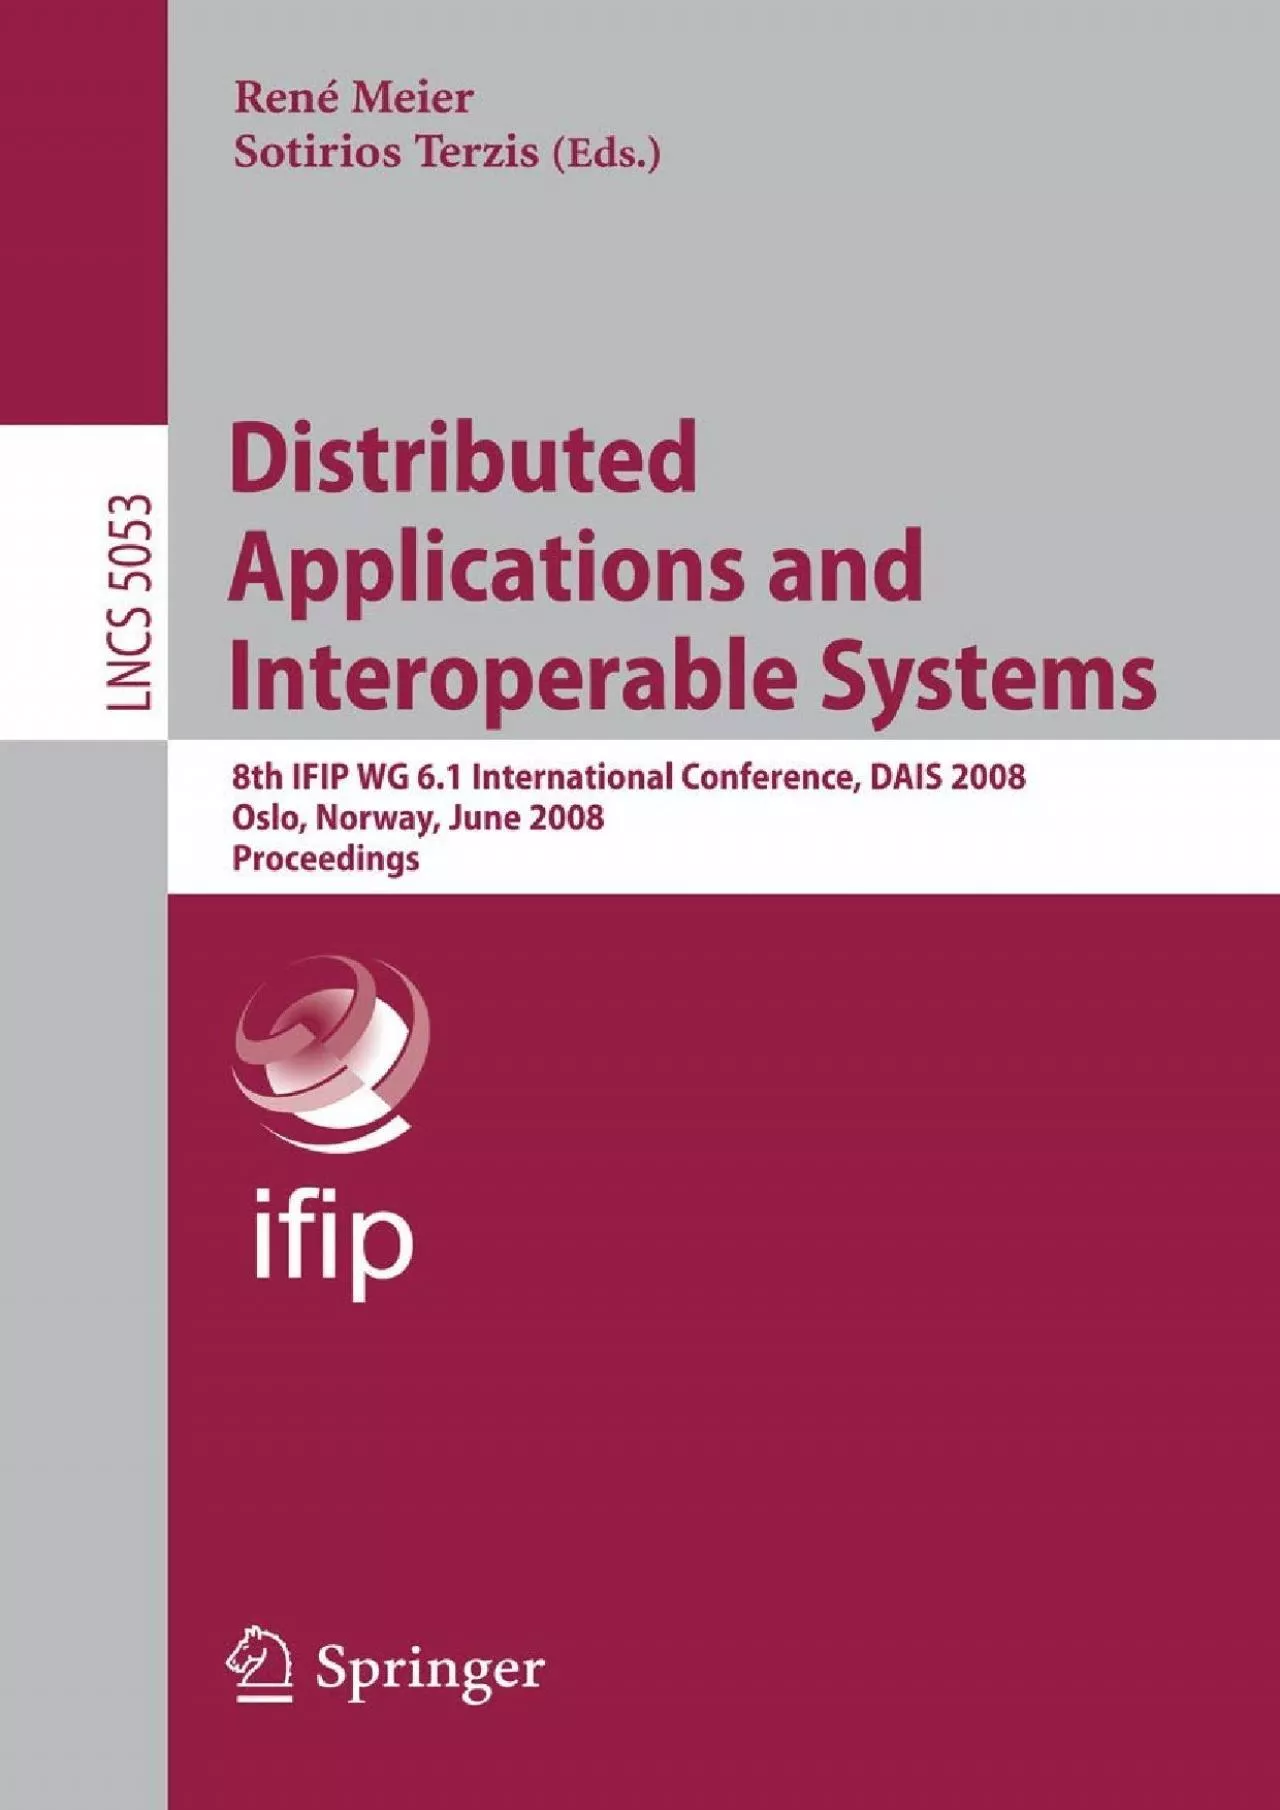 [READING BOOK]-Distributed Applications and Interoperable Systems: 8th IFIP WG 6.1 International